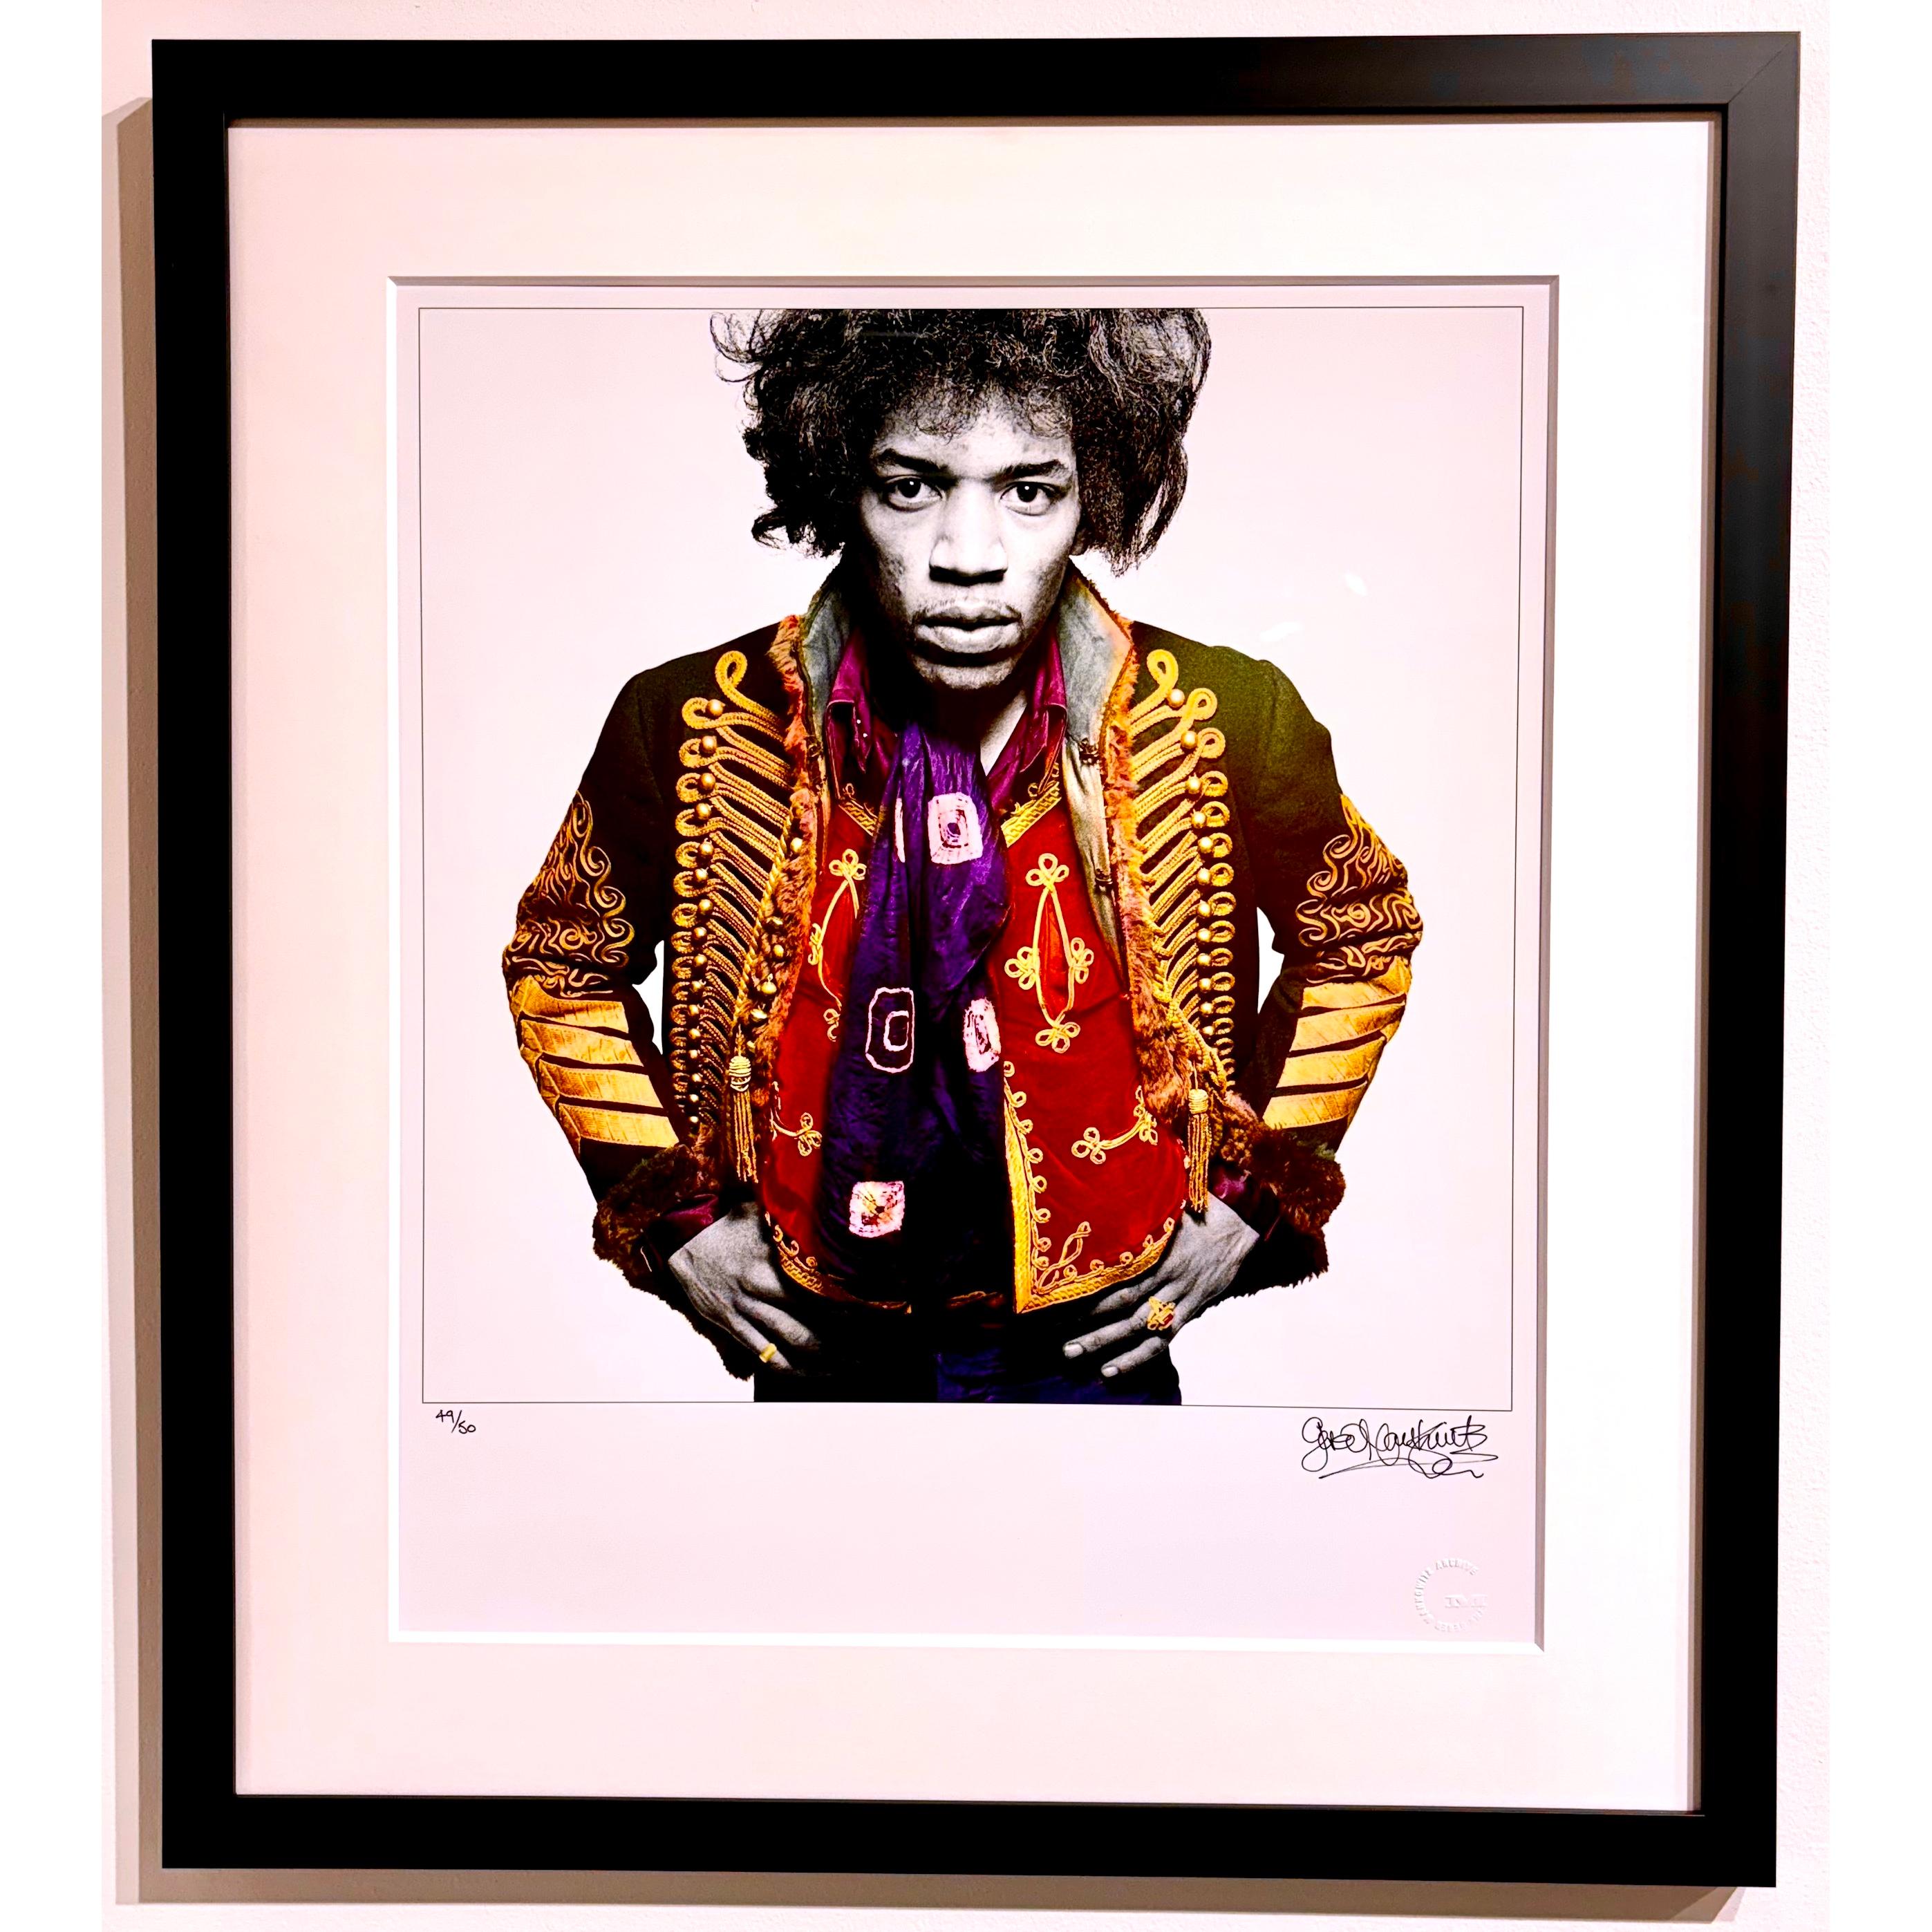 Jimi Hendrix classic color by Gered Mankowitz - Signed limited edition 49/50